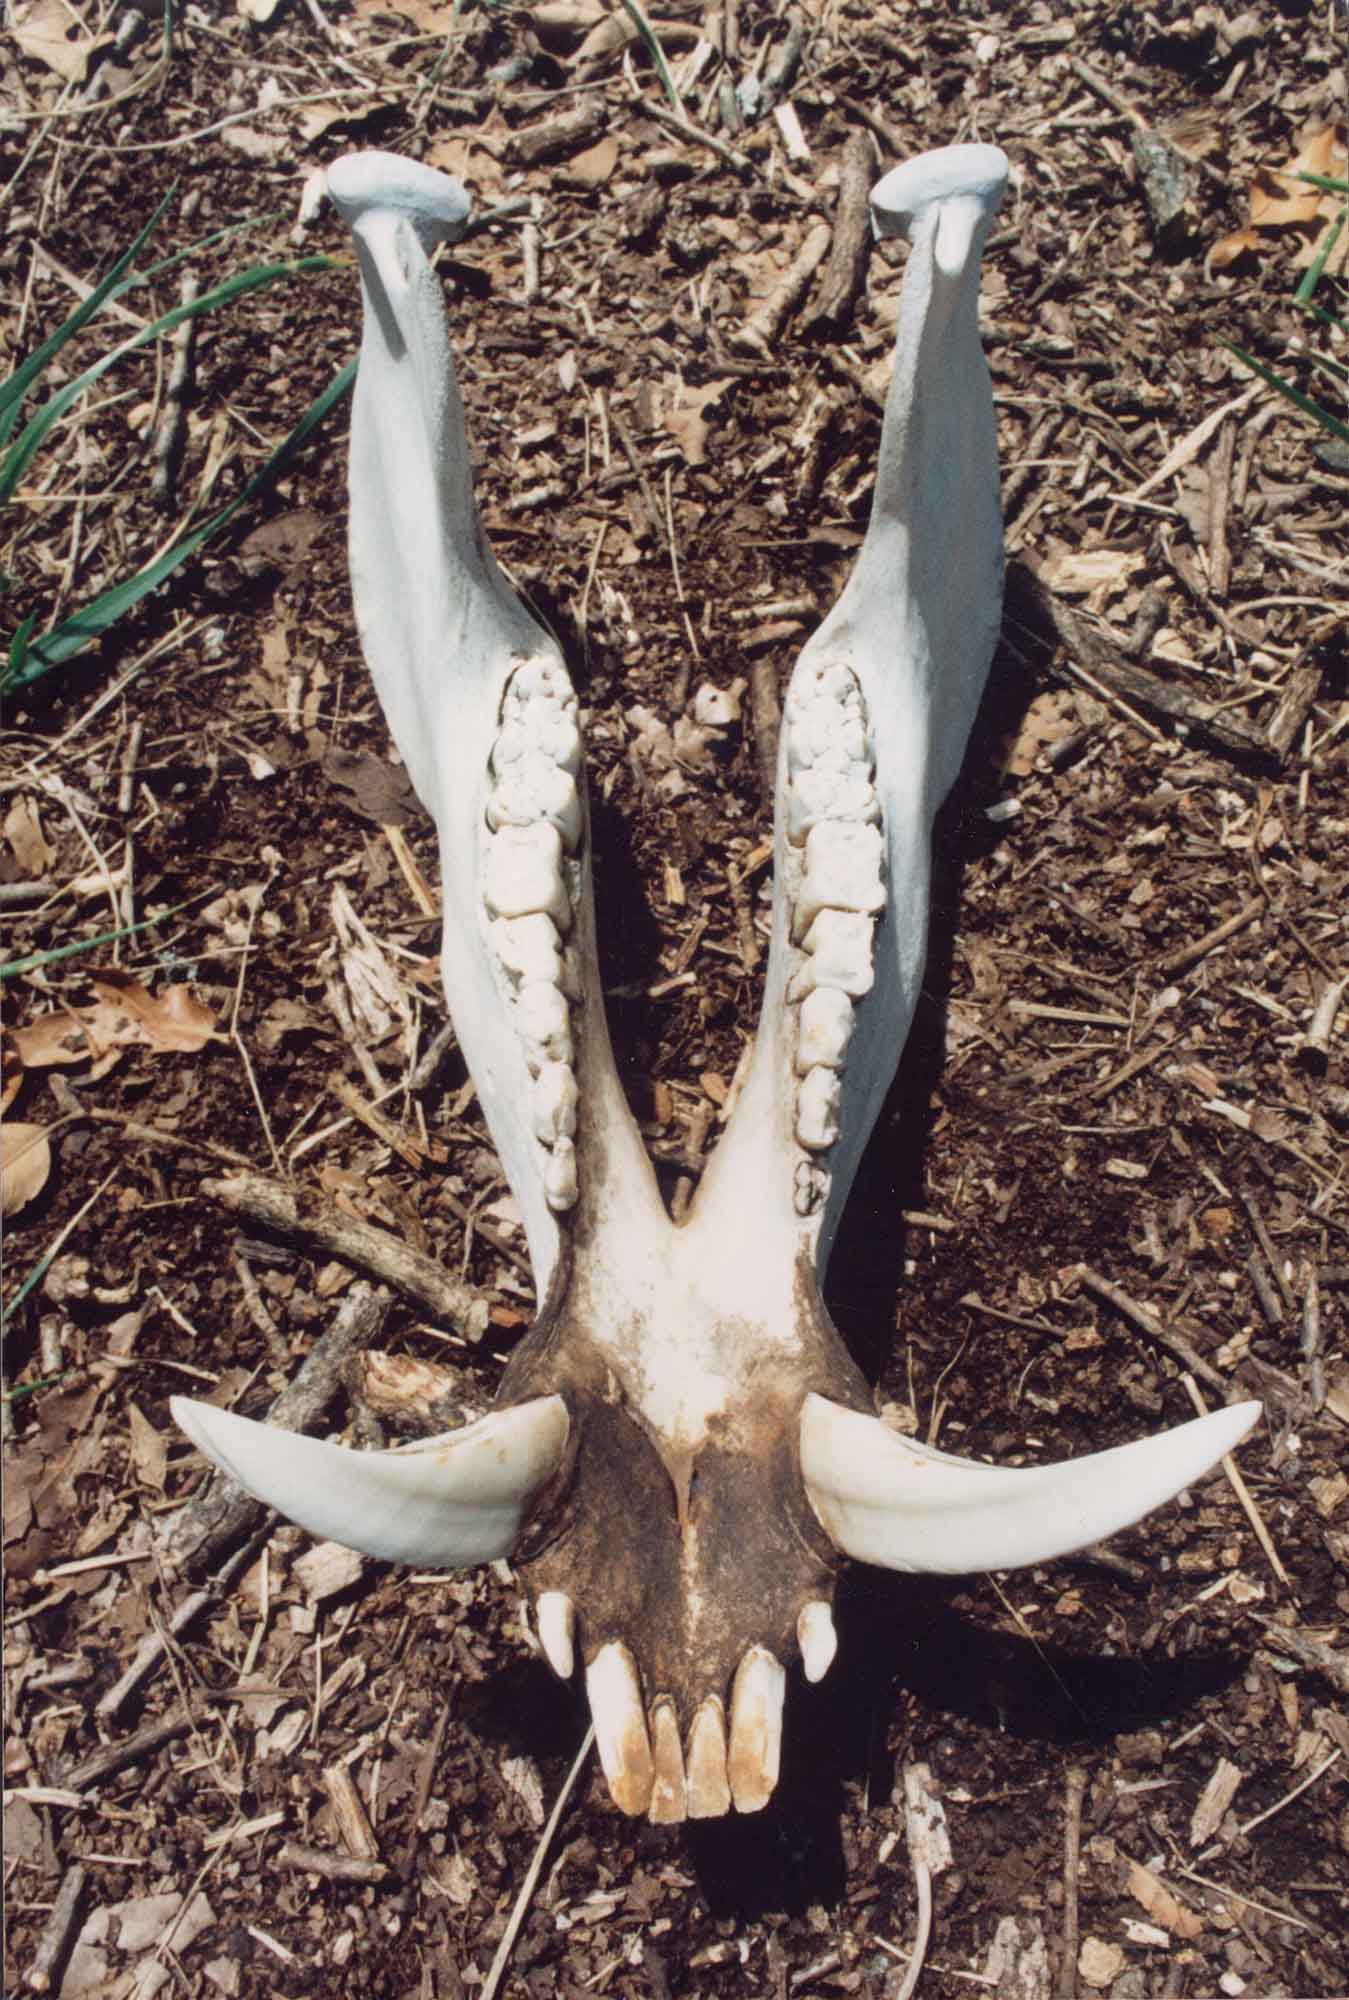 Tusks such as these, which are found on the lower jaw, or mandible, can be extremely dangerous when put to use by a mature boar. The upper tusks, or witters, help keep the lower tusks razor sharp.